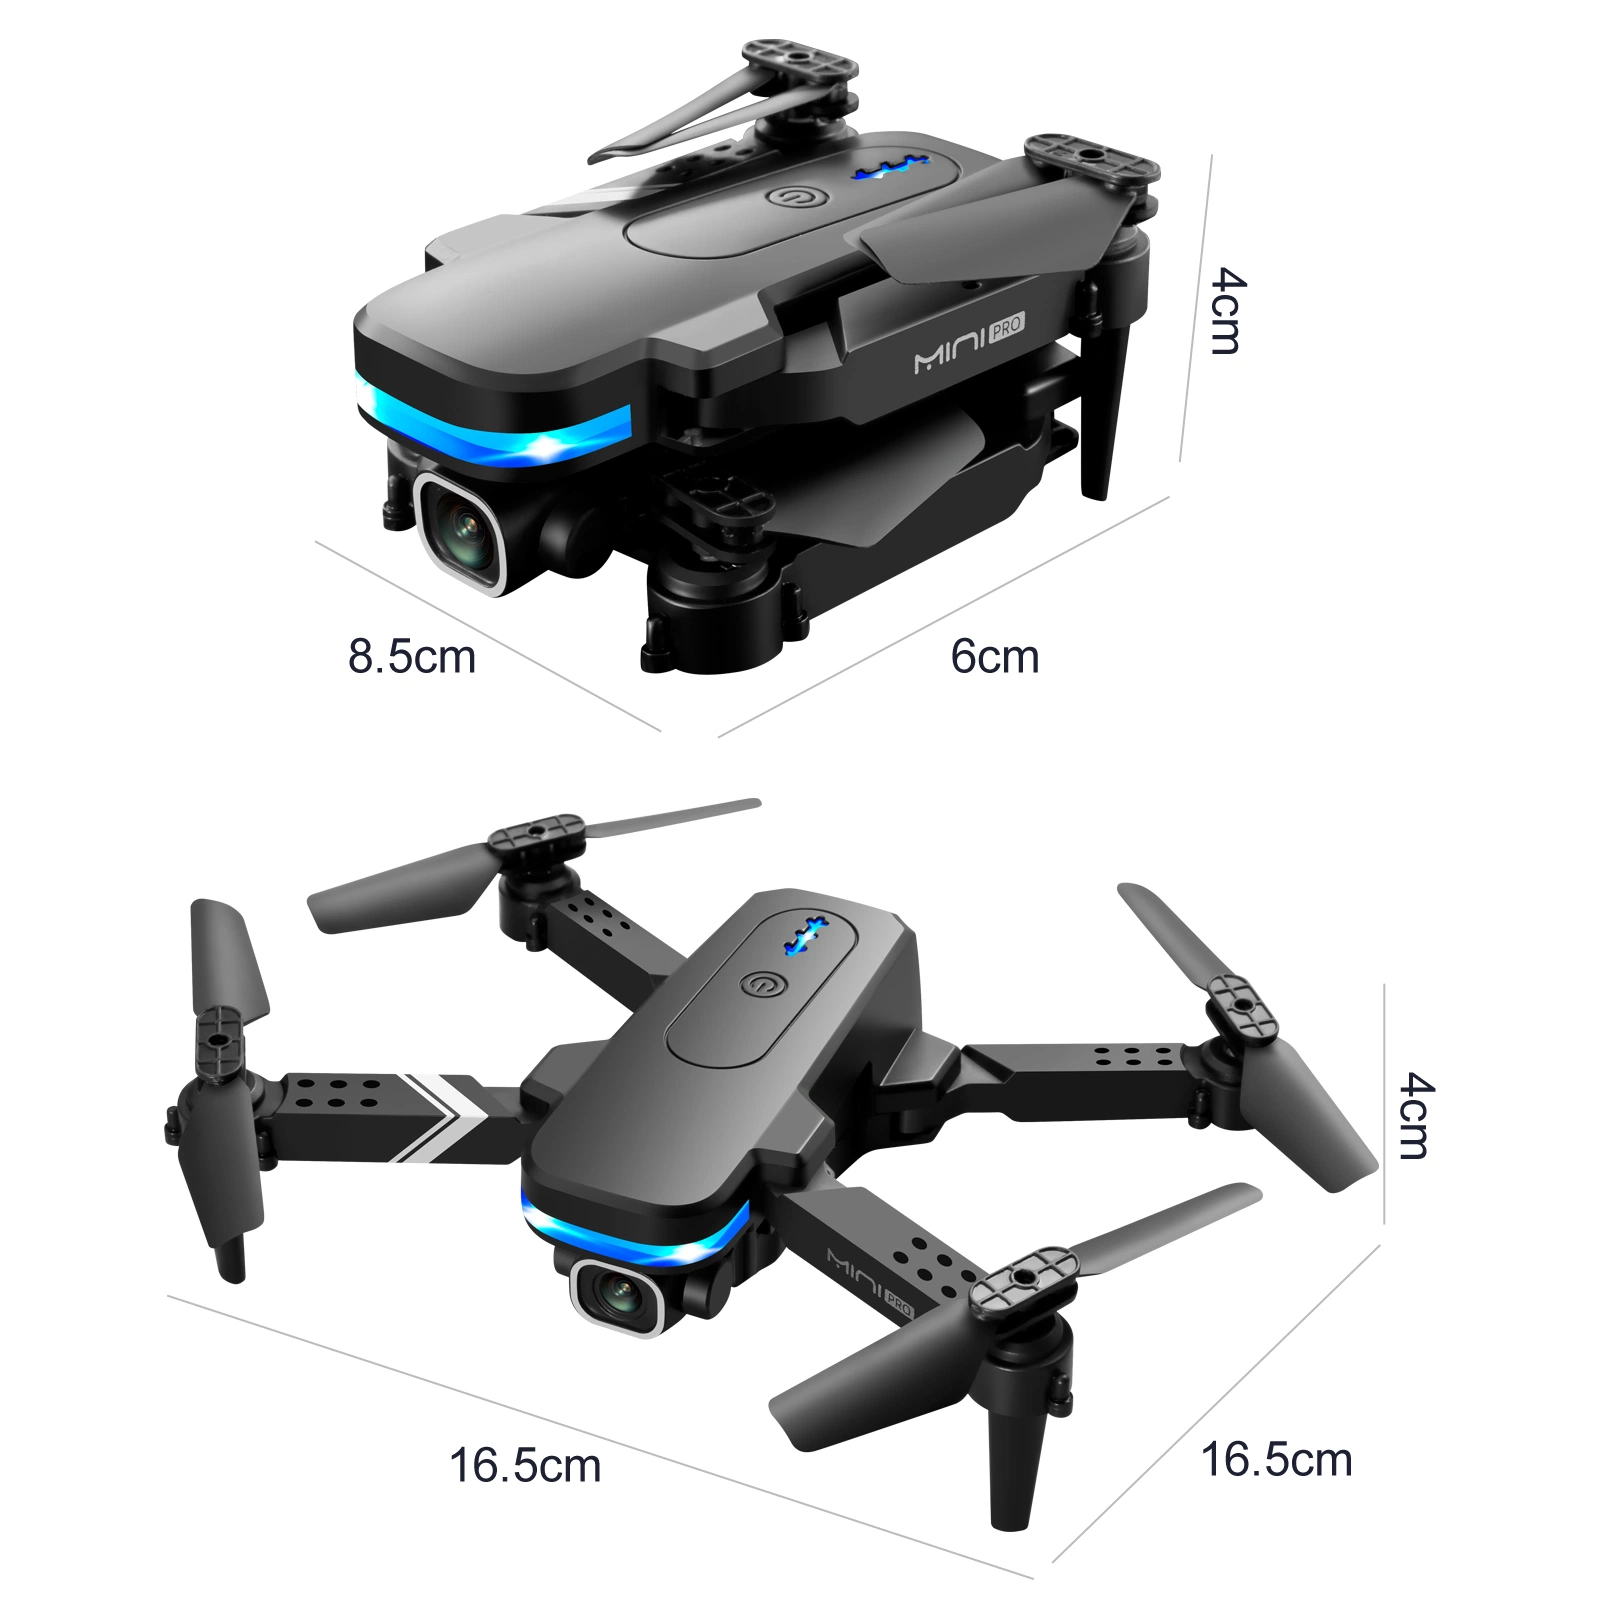 HD Dual Camera WiFi Foldable RC Quadcopter Aerial Photography Aircraft